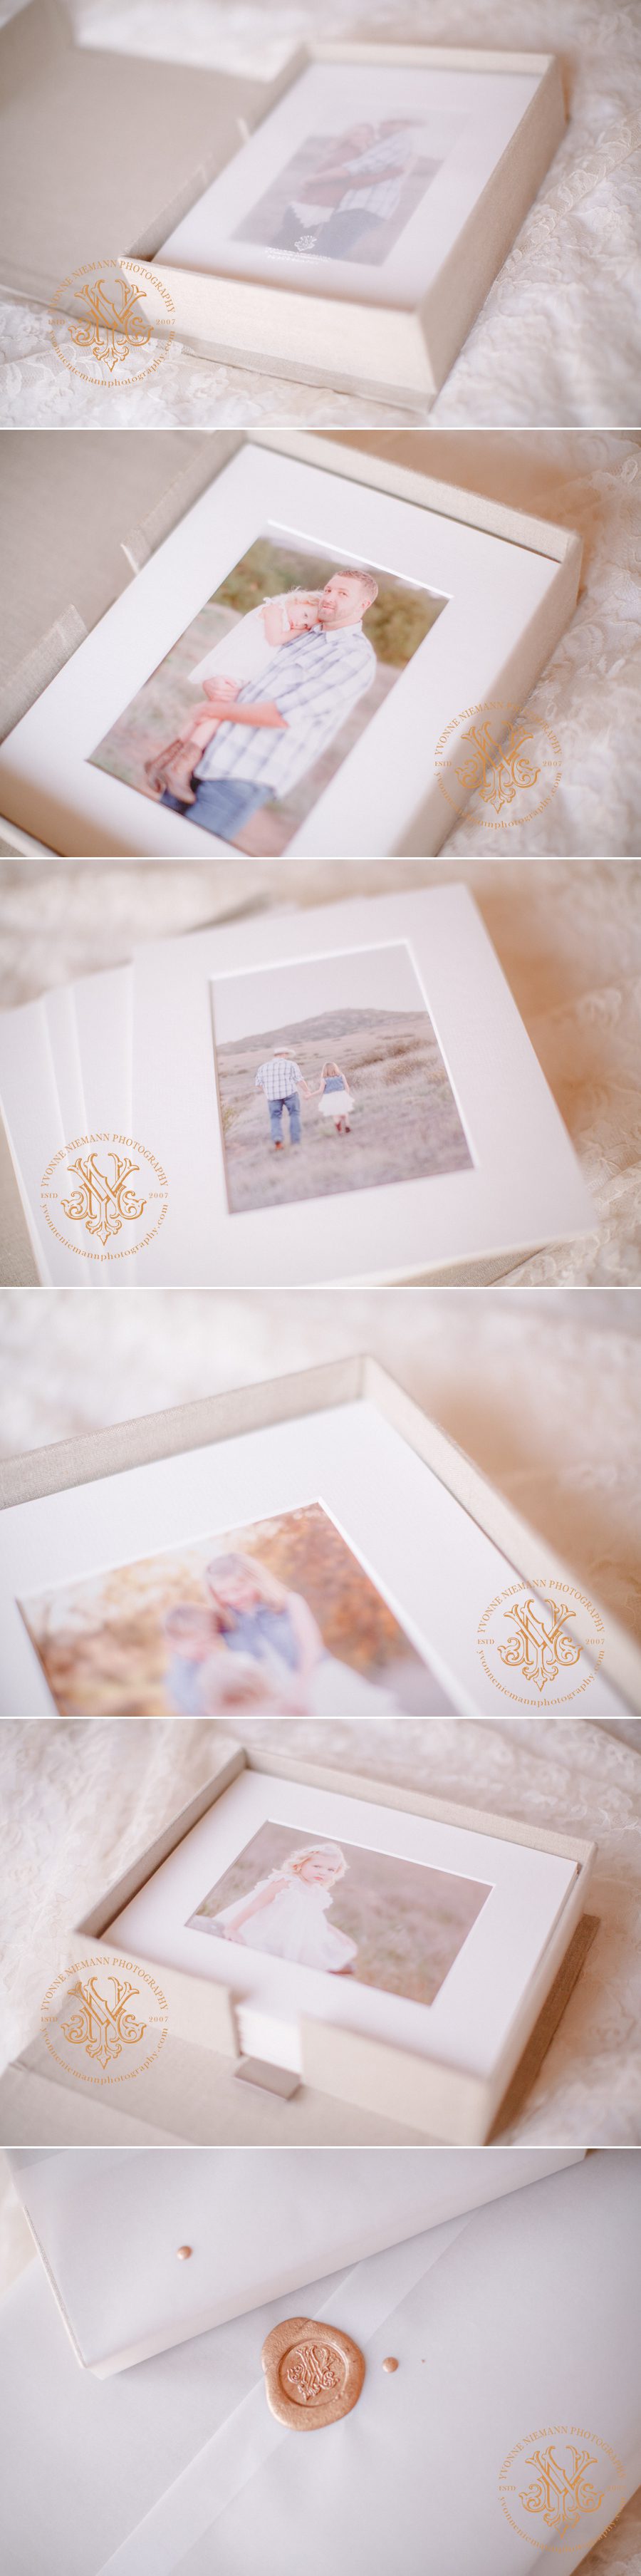 Product shots of family photographic heirloom box with matted prints.